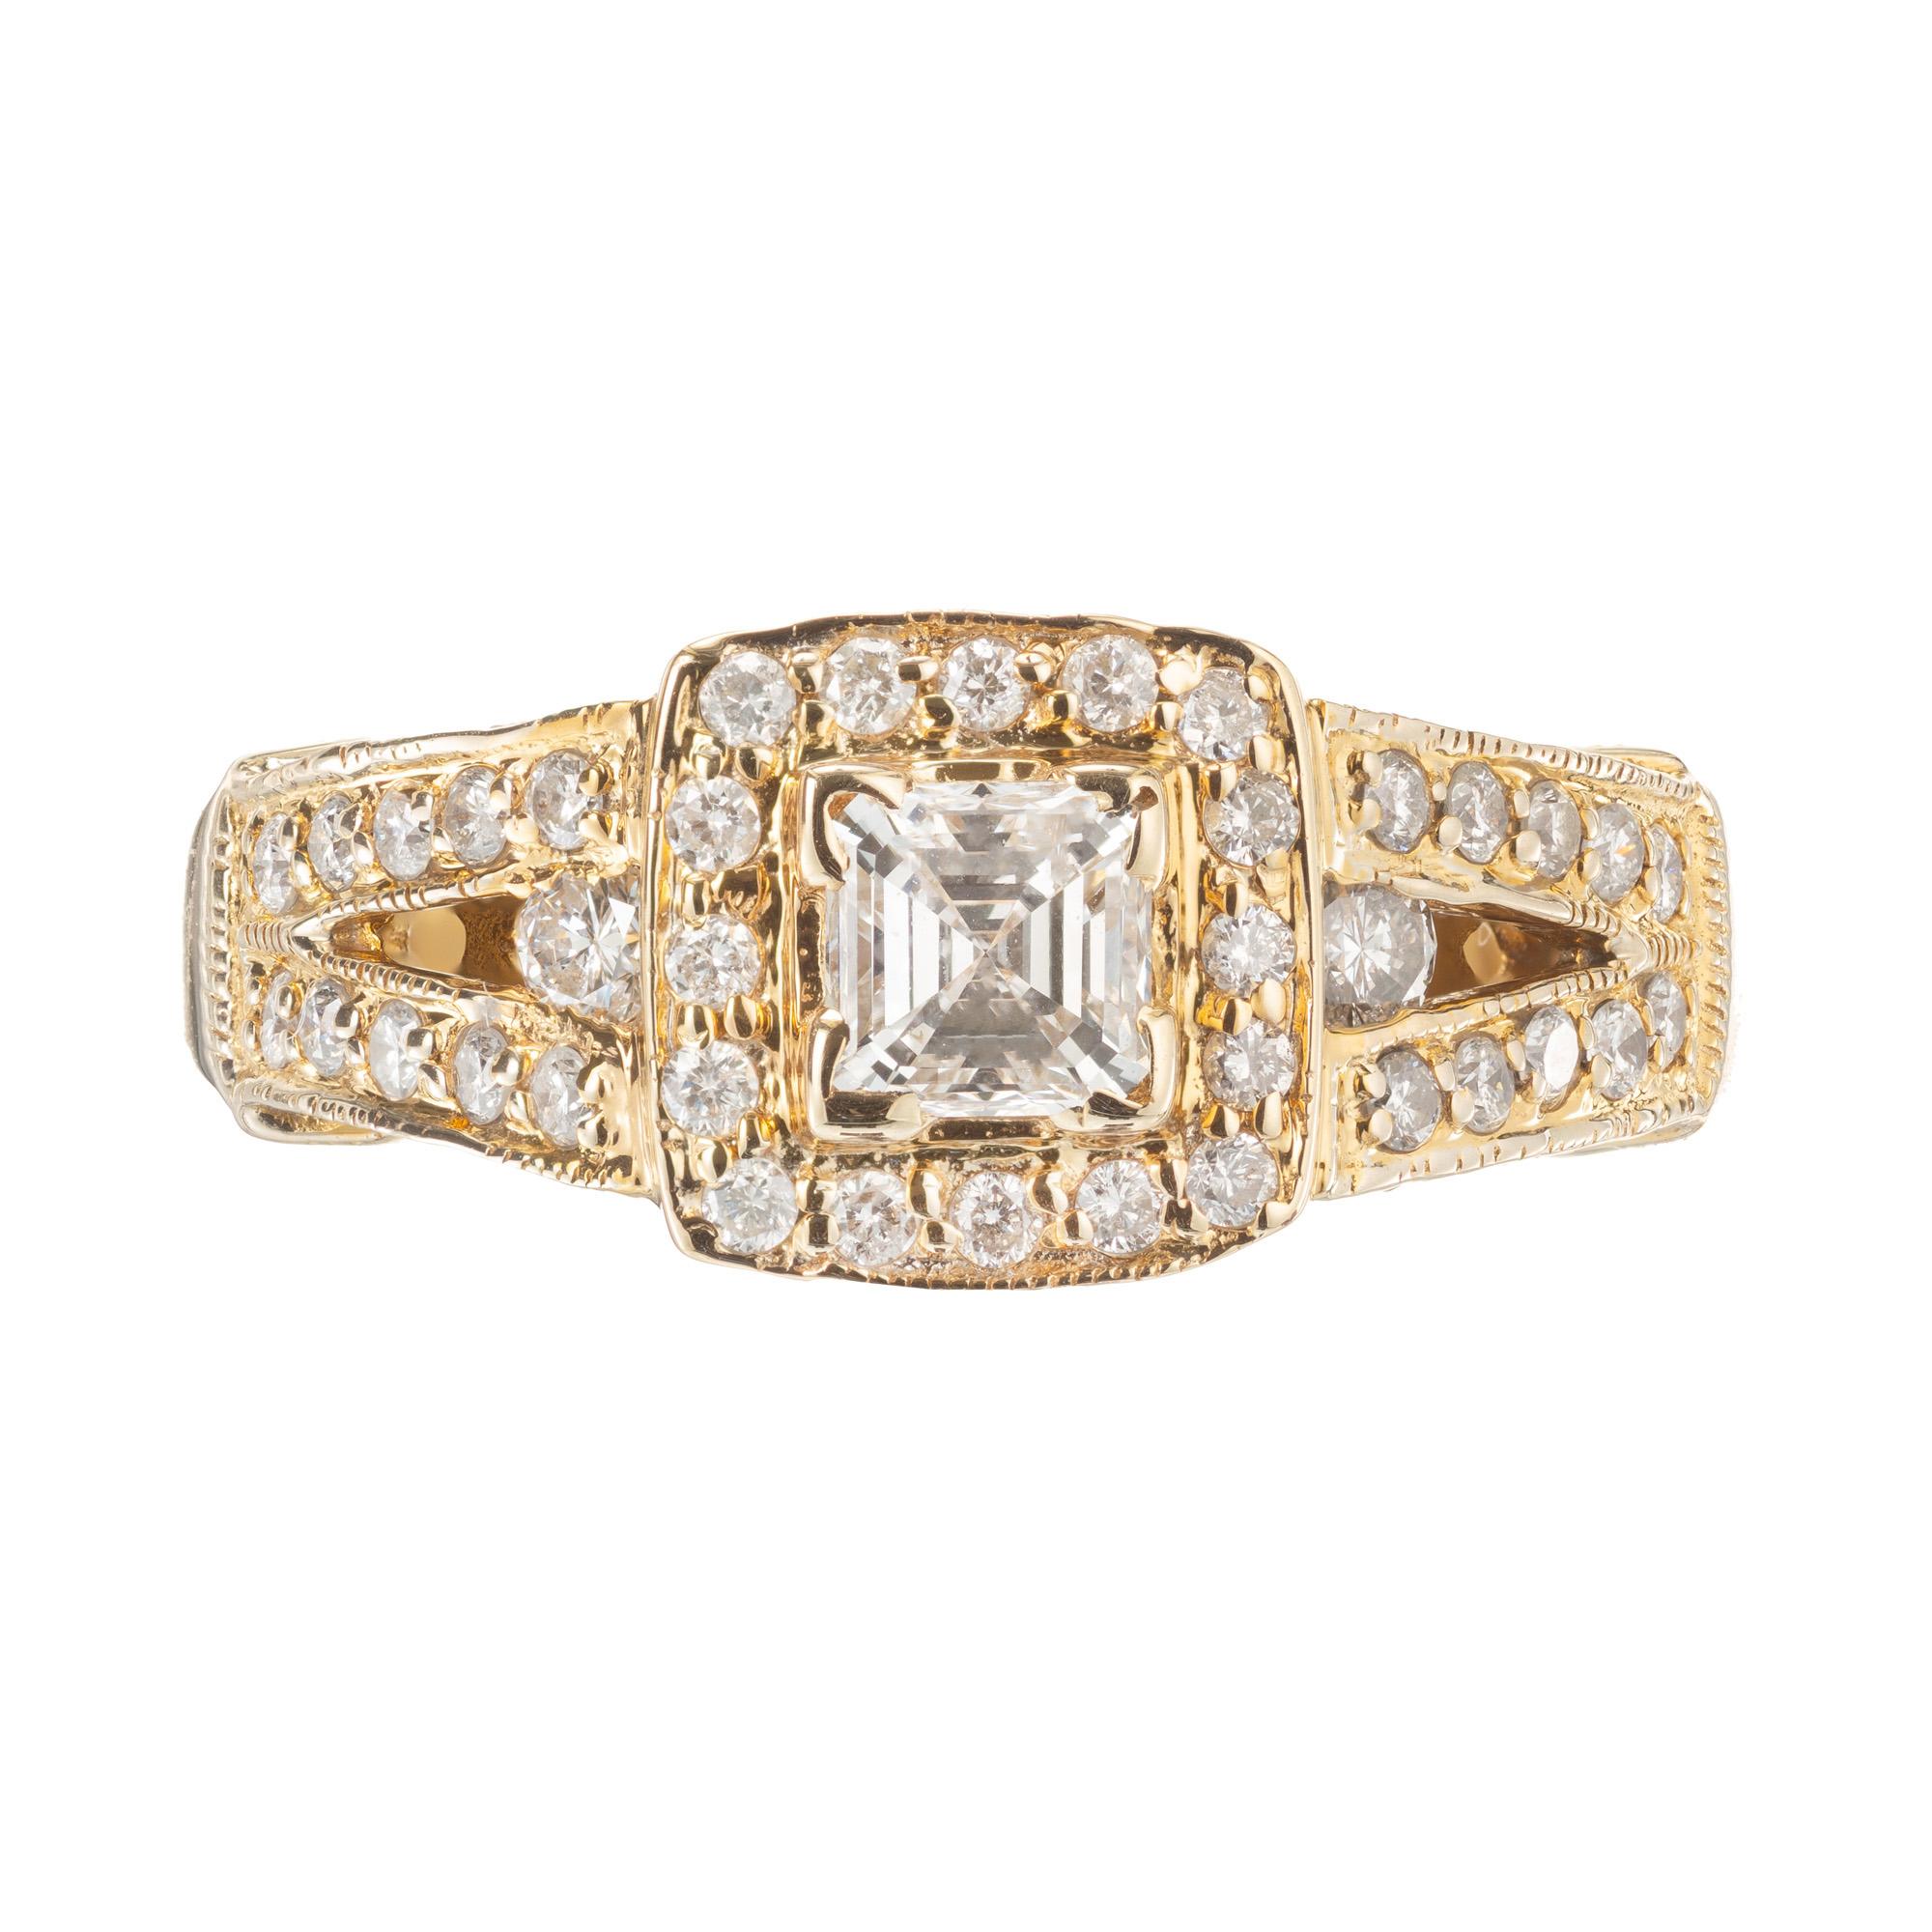 .50ct diamond engagement ring. Step cut square center diamond with a halo of round diamonds and princess cut accent diamonds along the shank in a 14k yellow gold setting.

1 step cut square diamond I VS , approx. .50ct 
75 round brilliant cut